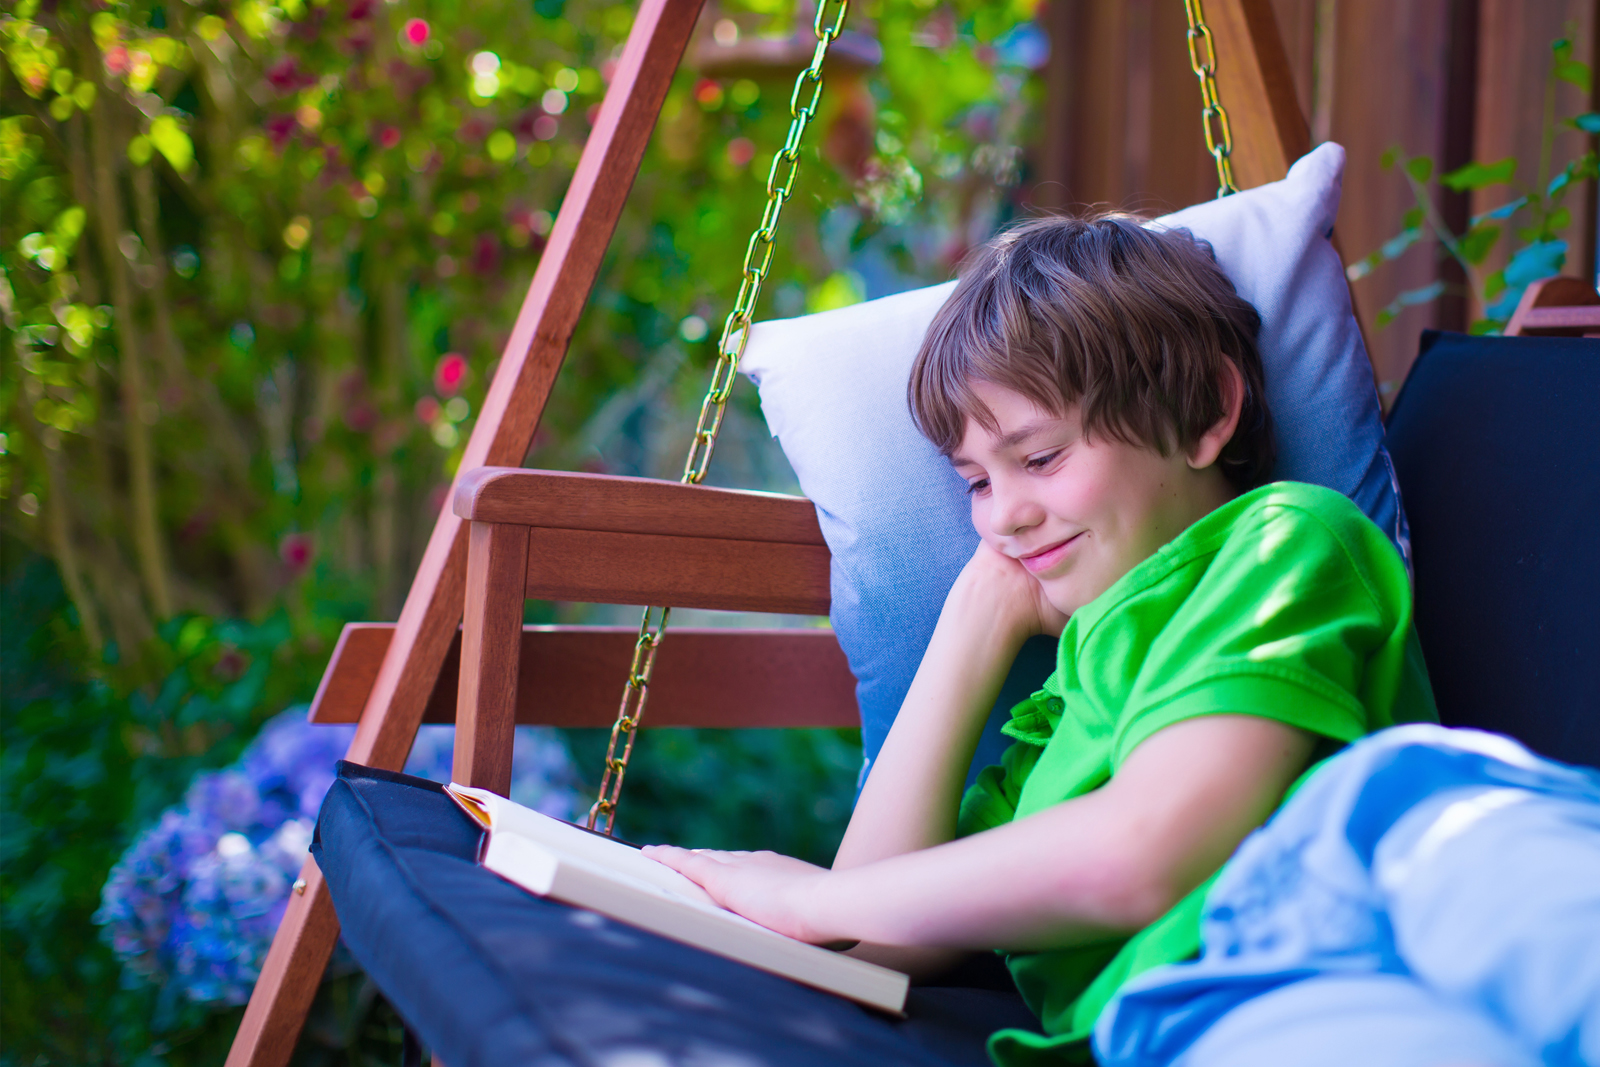 Reading should be a fun activity, not something seen as a punishment. (Getty Images/iStockphoto/FamVeld)